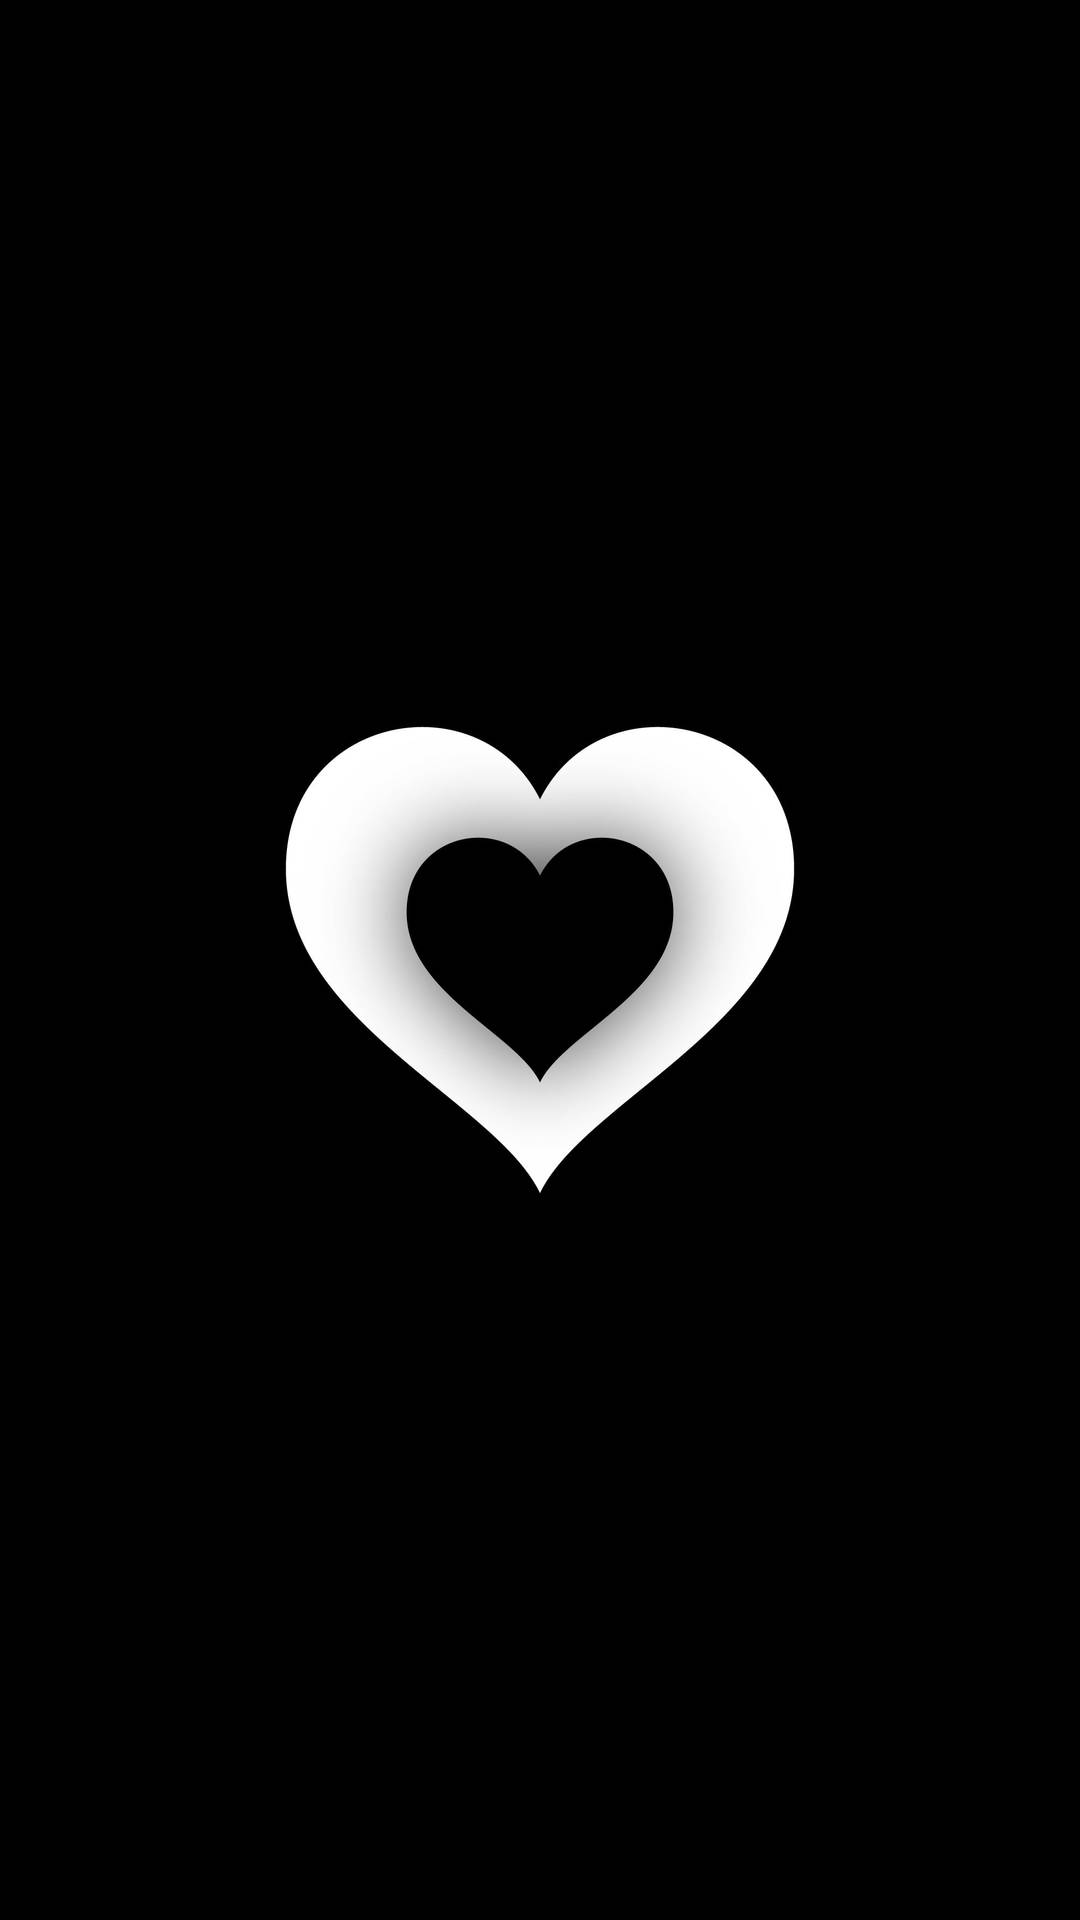 Double Black And White Heart Wallpaper